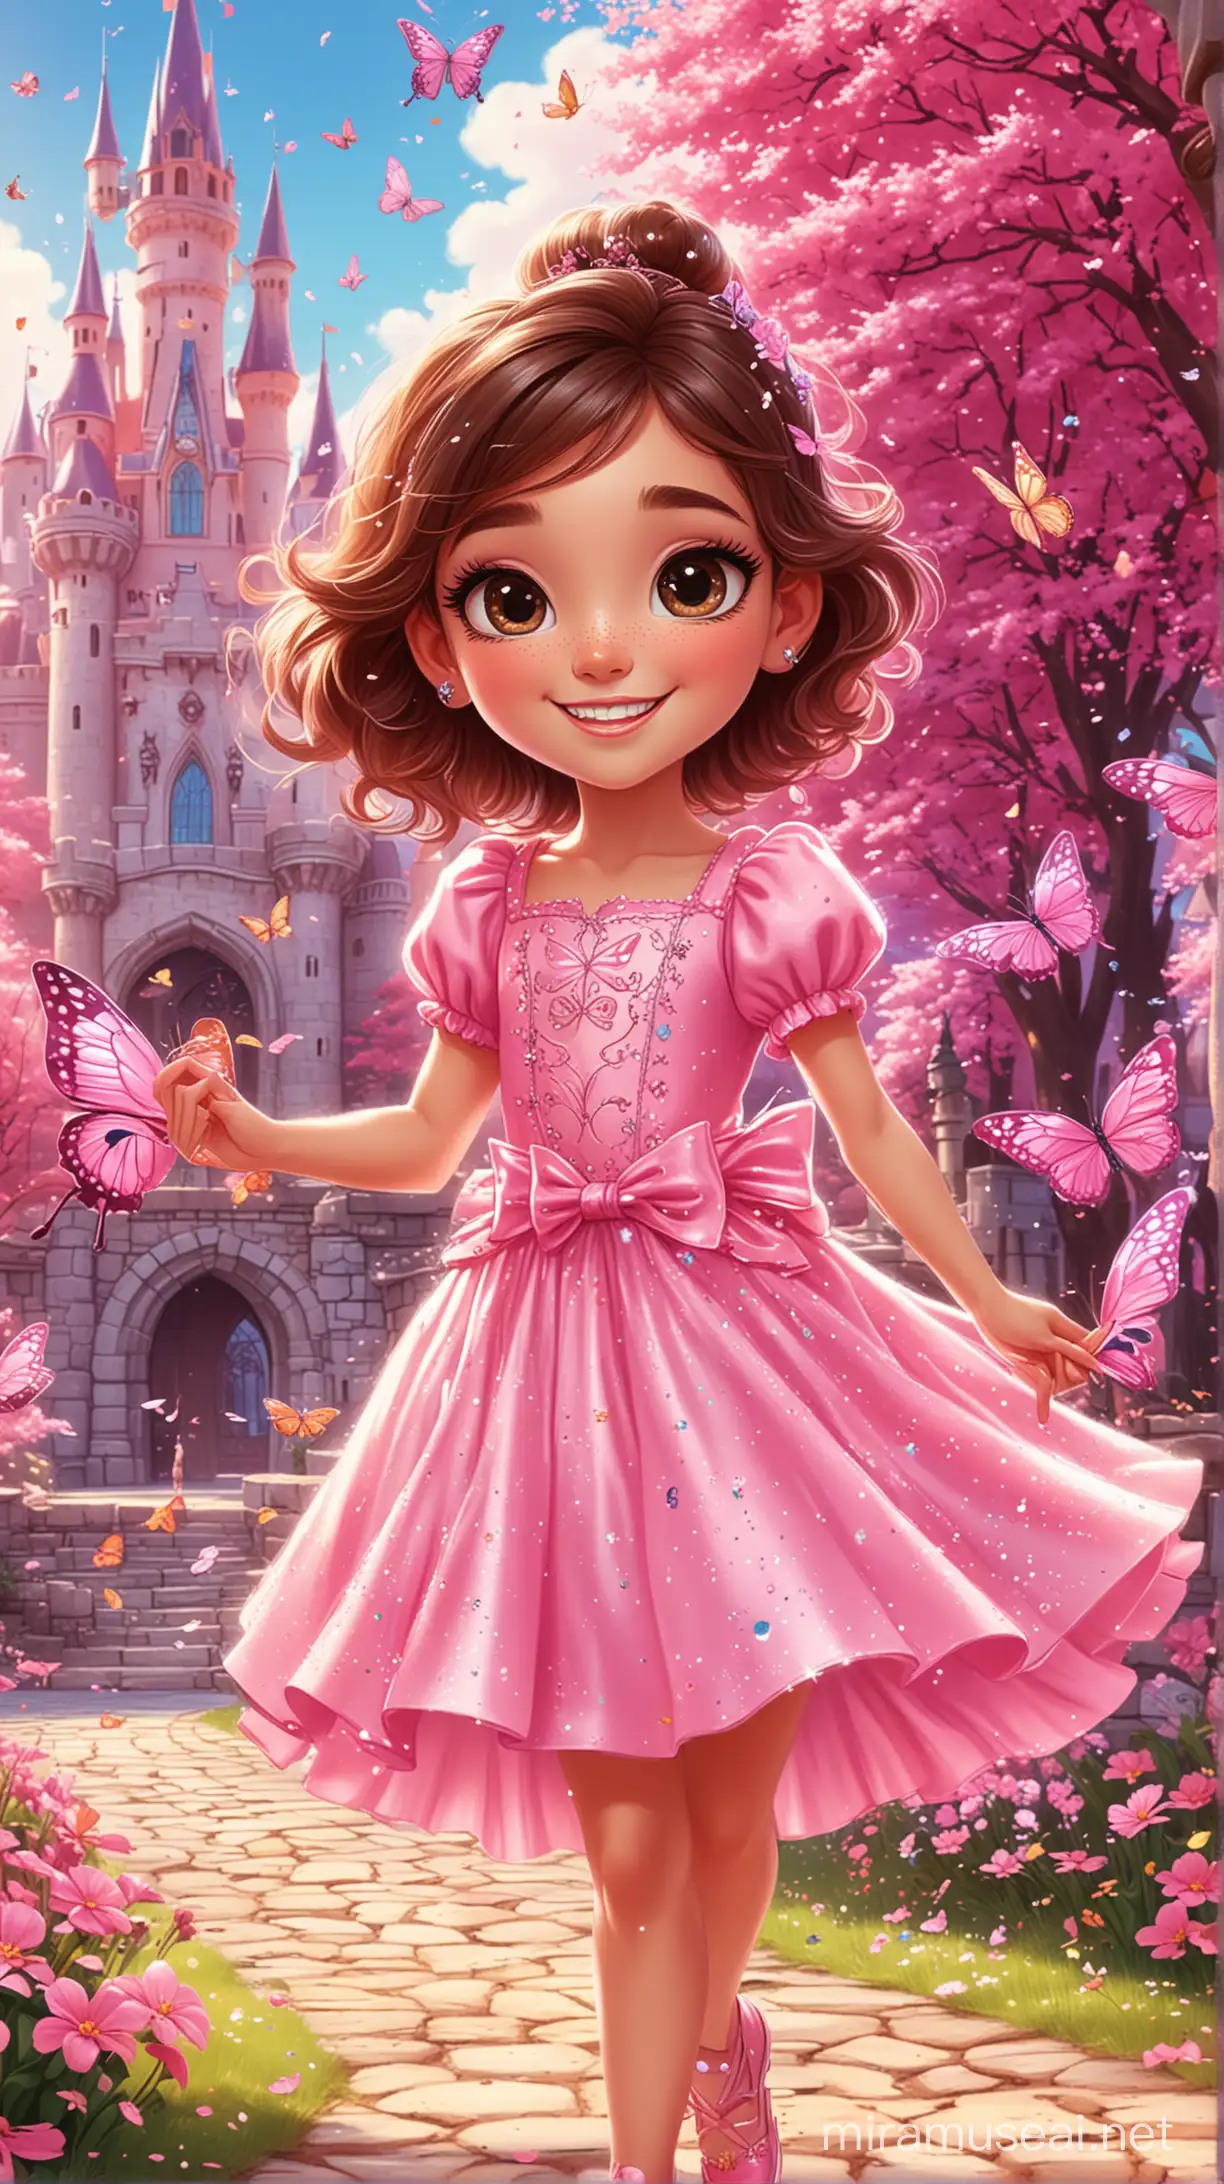 Smiling Girl Dancer in Pink with Glitter and Butterflies